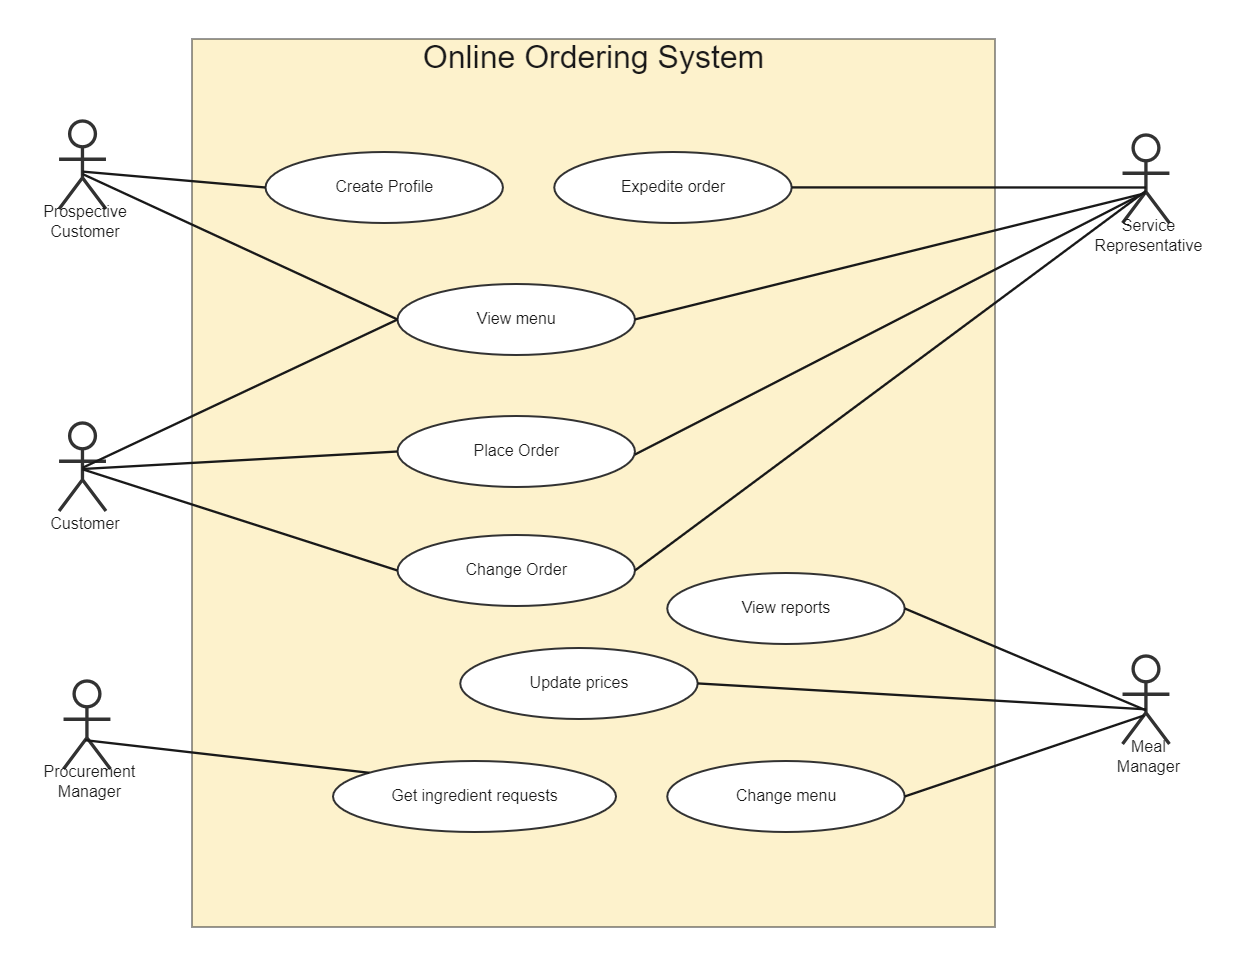 Online Ordering System Use Case